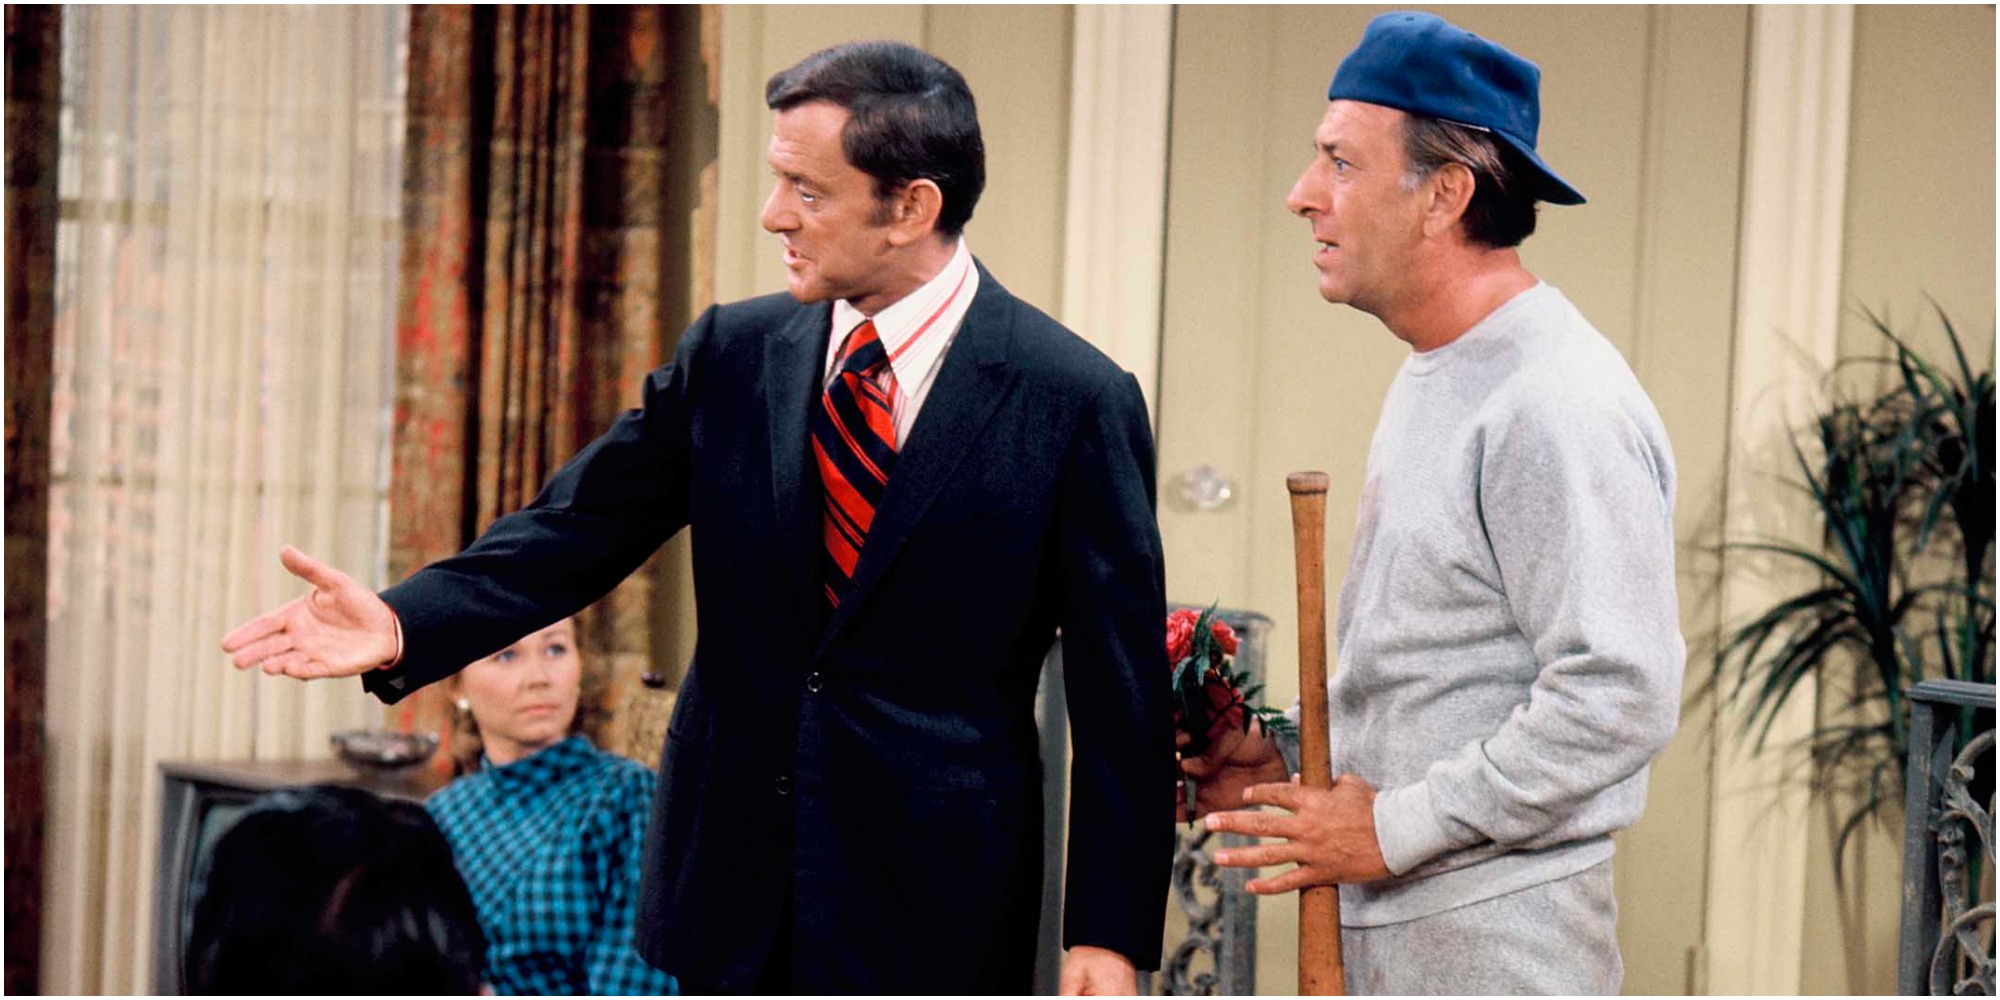 Tony Randall and Jack Klugman on the set of ABC's "The Odd Couple."